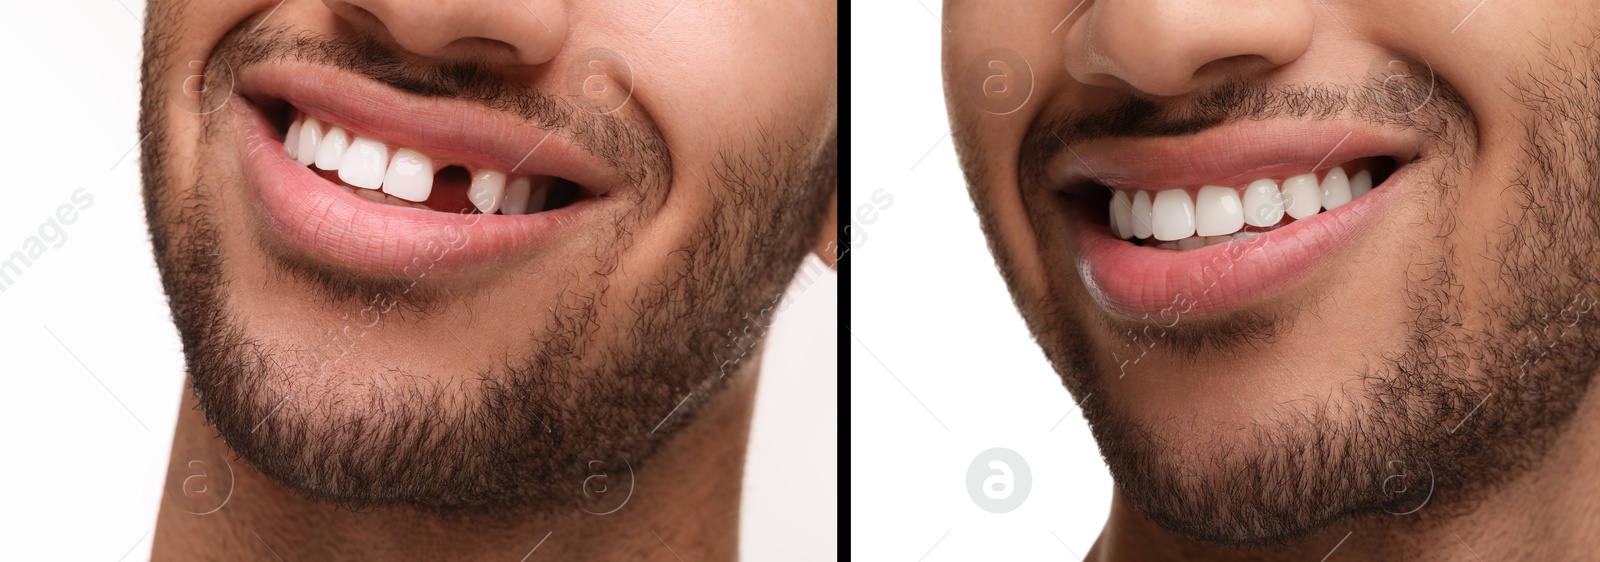 Image of Man showing teeth before and after dental implant surgery, closeup. Collage of photos on white background